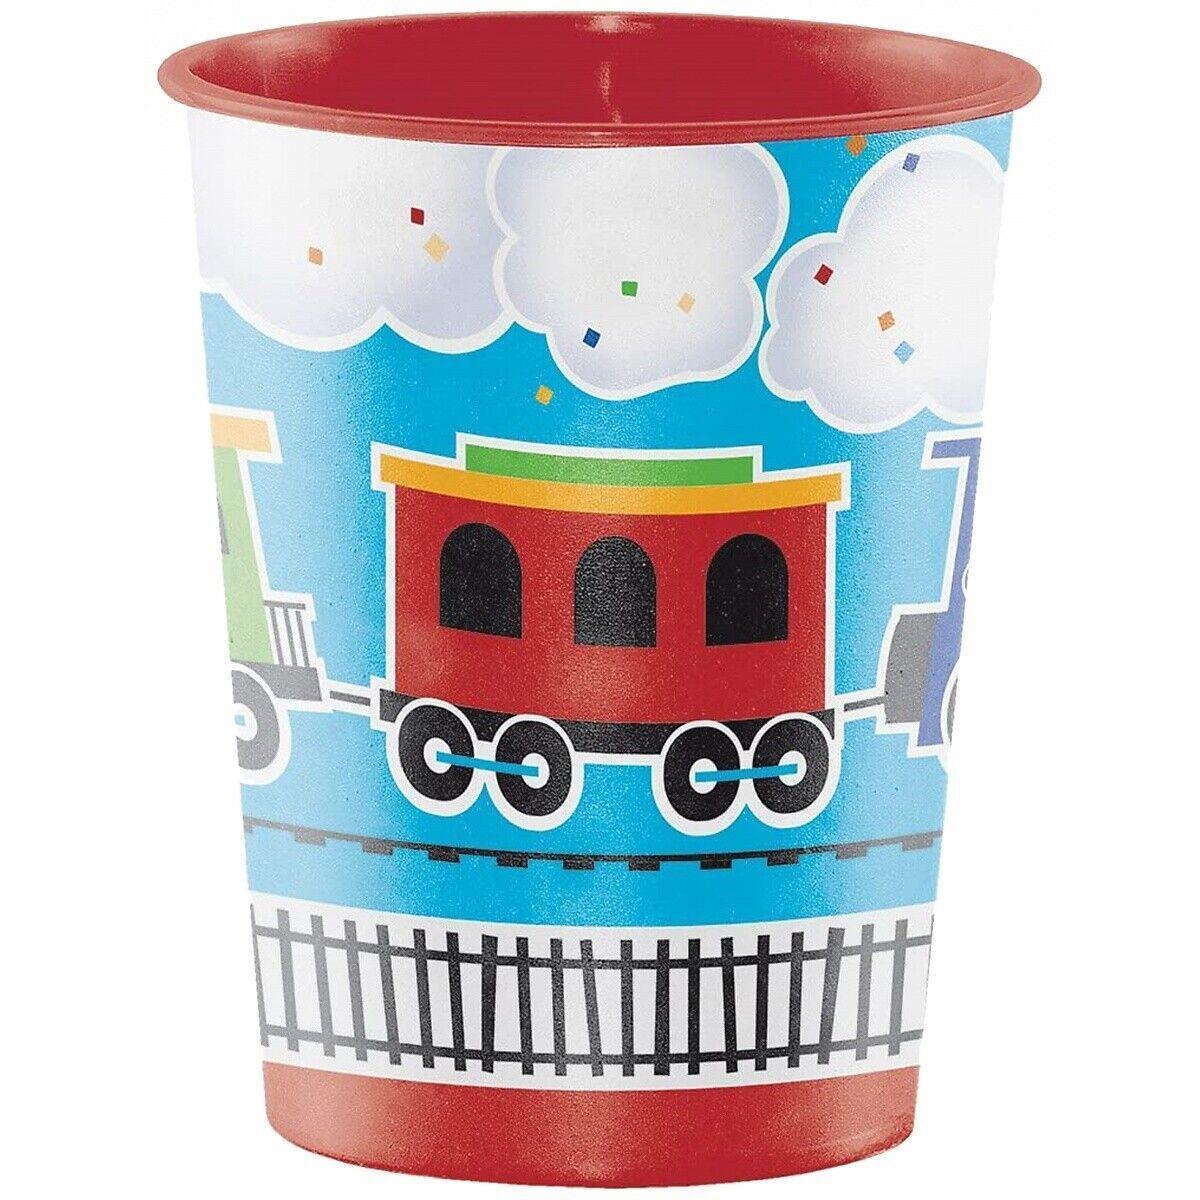 Creative Party All Aboard Plastic Train Party Cup (Pack of 6) (Red/Blue/Black) (One Size)